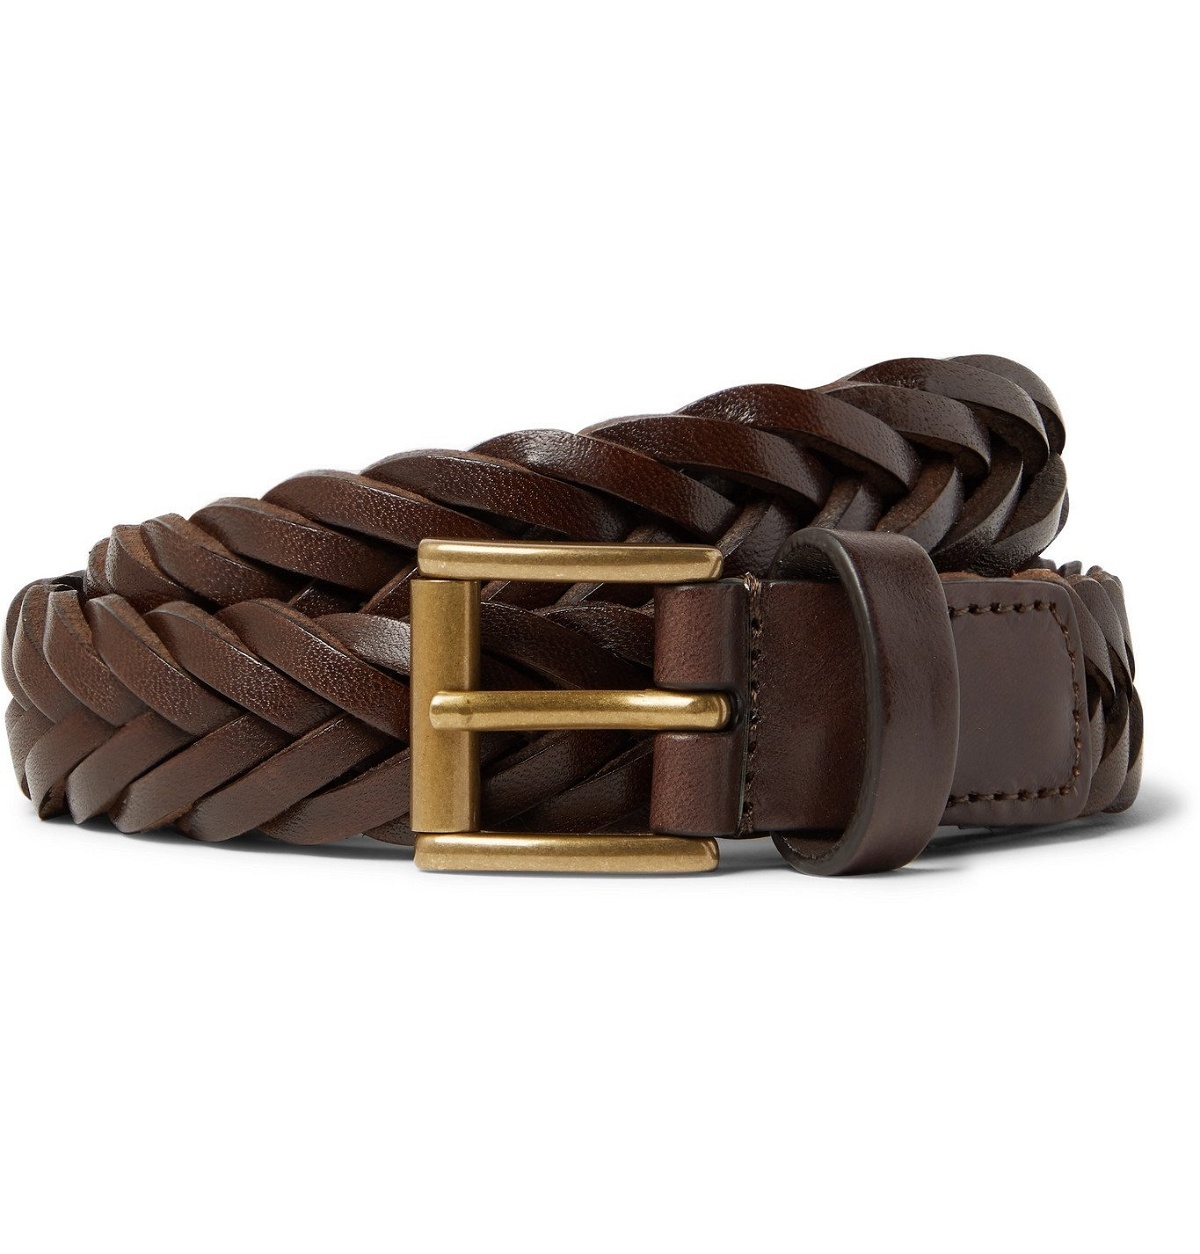 Anderson's - 2.5cm Woven Leather Belt - Brown Anderson's